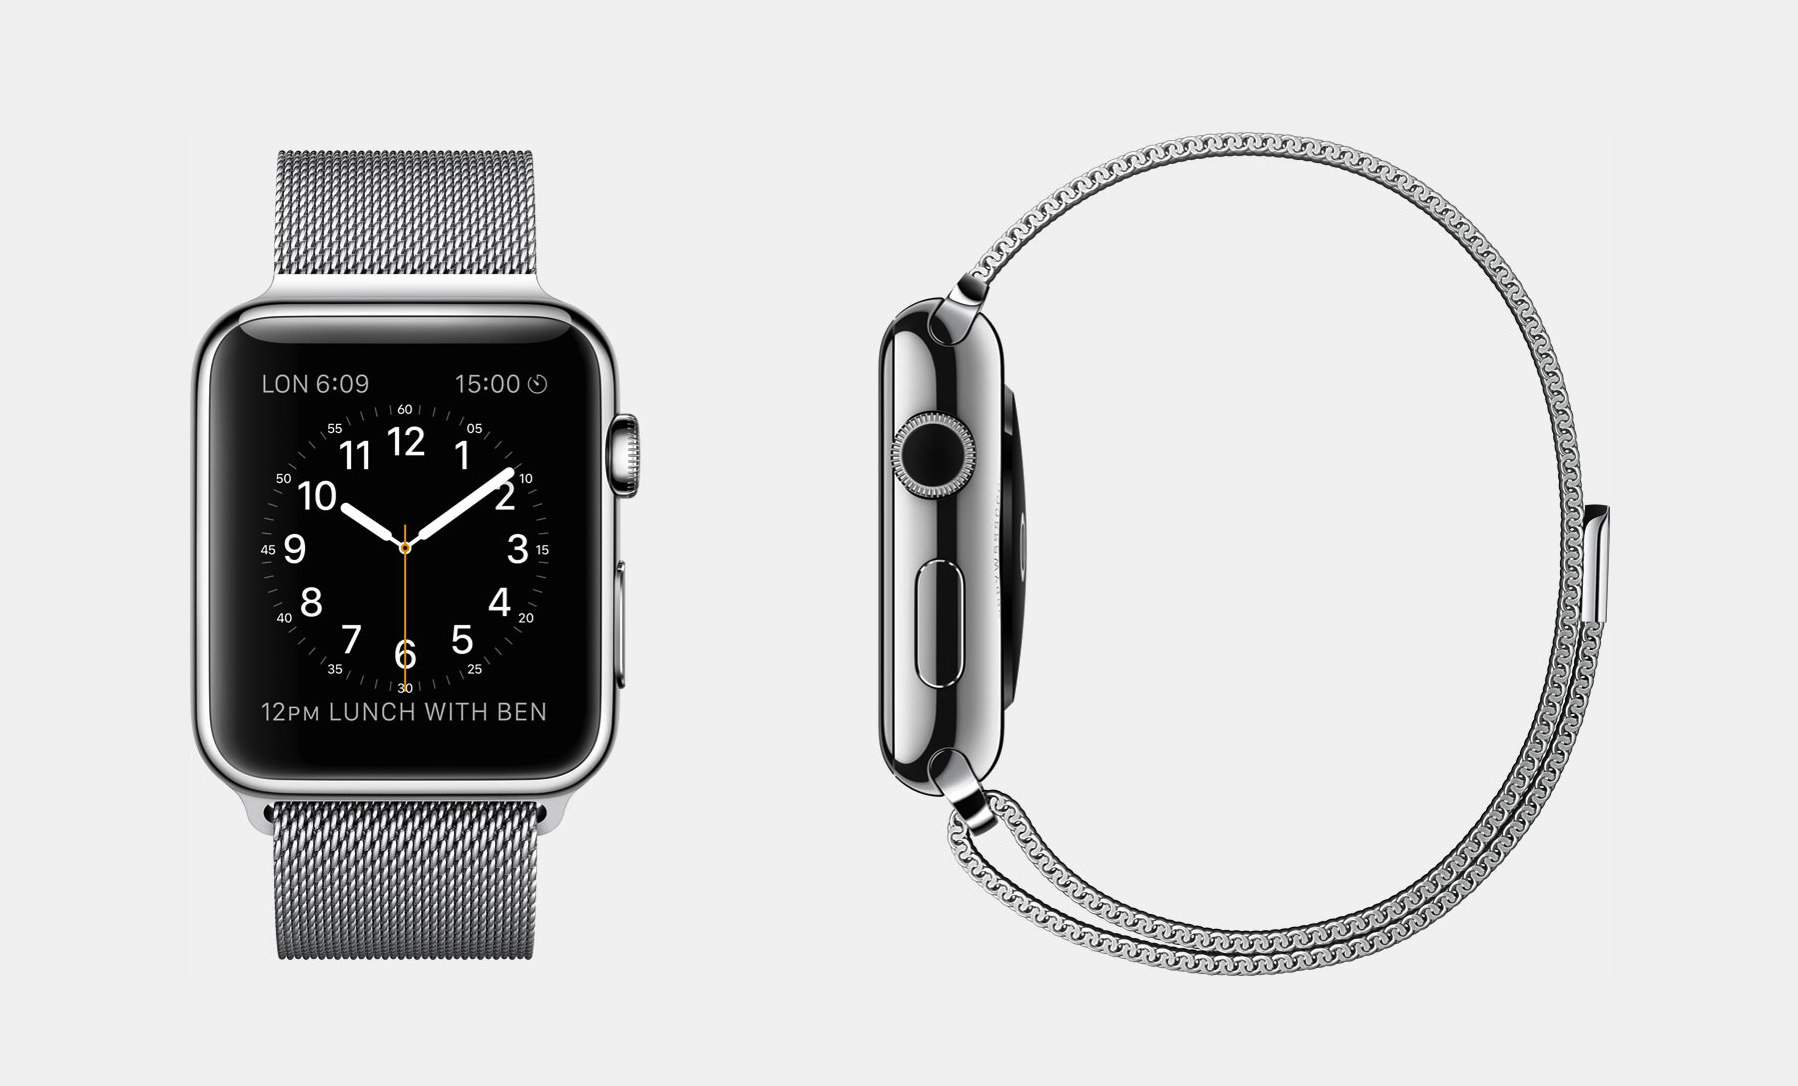 Apple Watch will finally move the needle on smartwatches